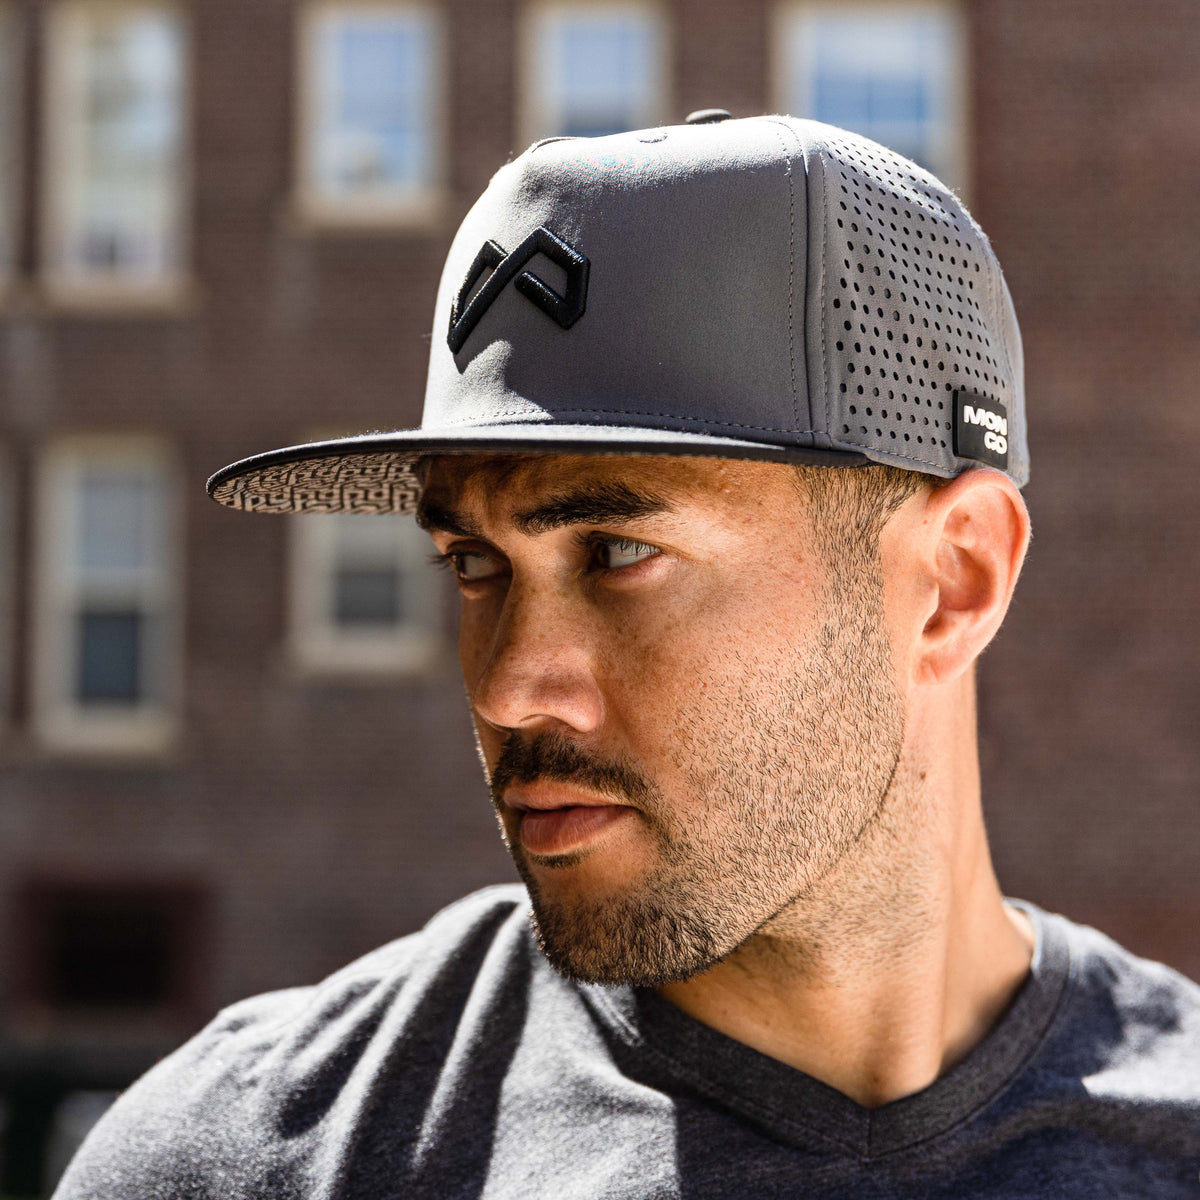 Mongo Hats - Best Selling Big Hats for Big Heads - Extra Large Snapback Hats